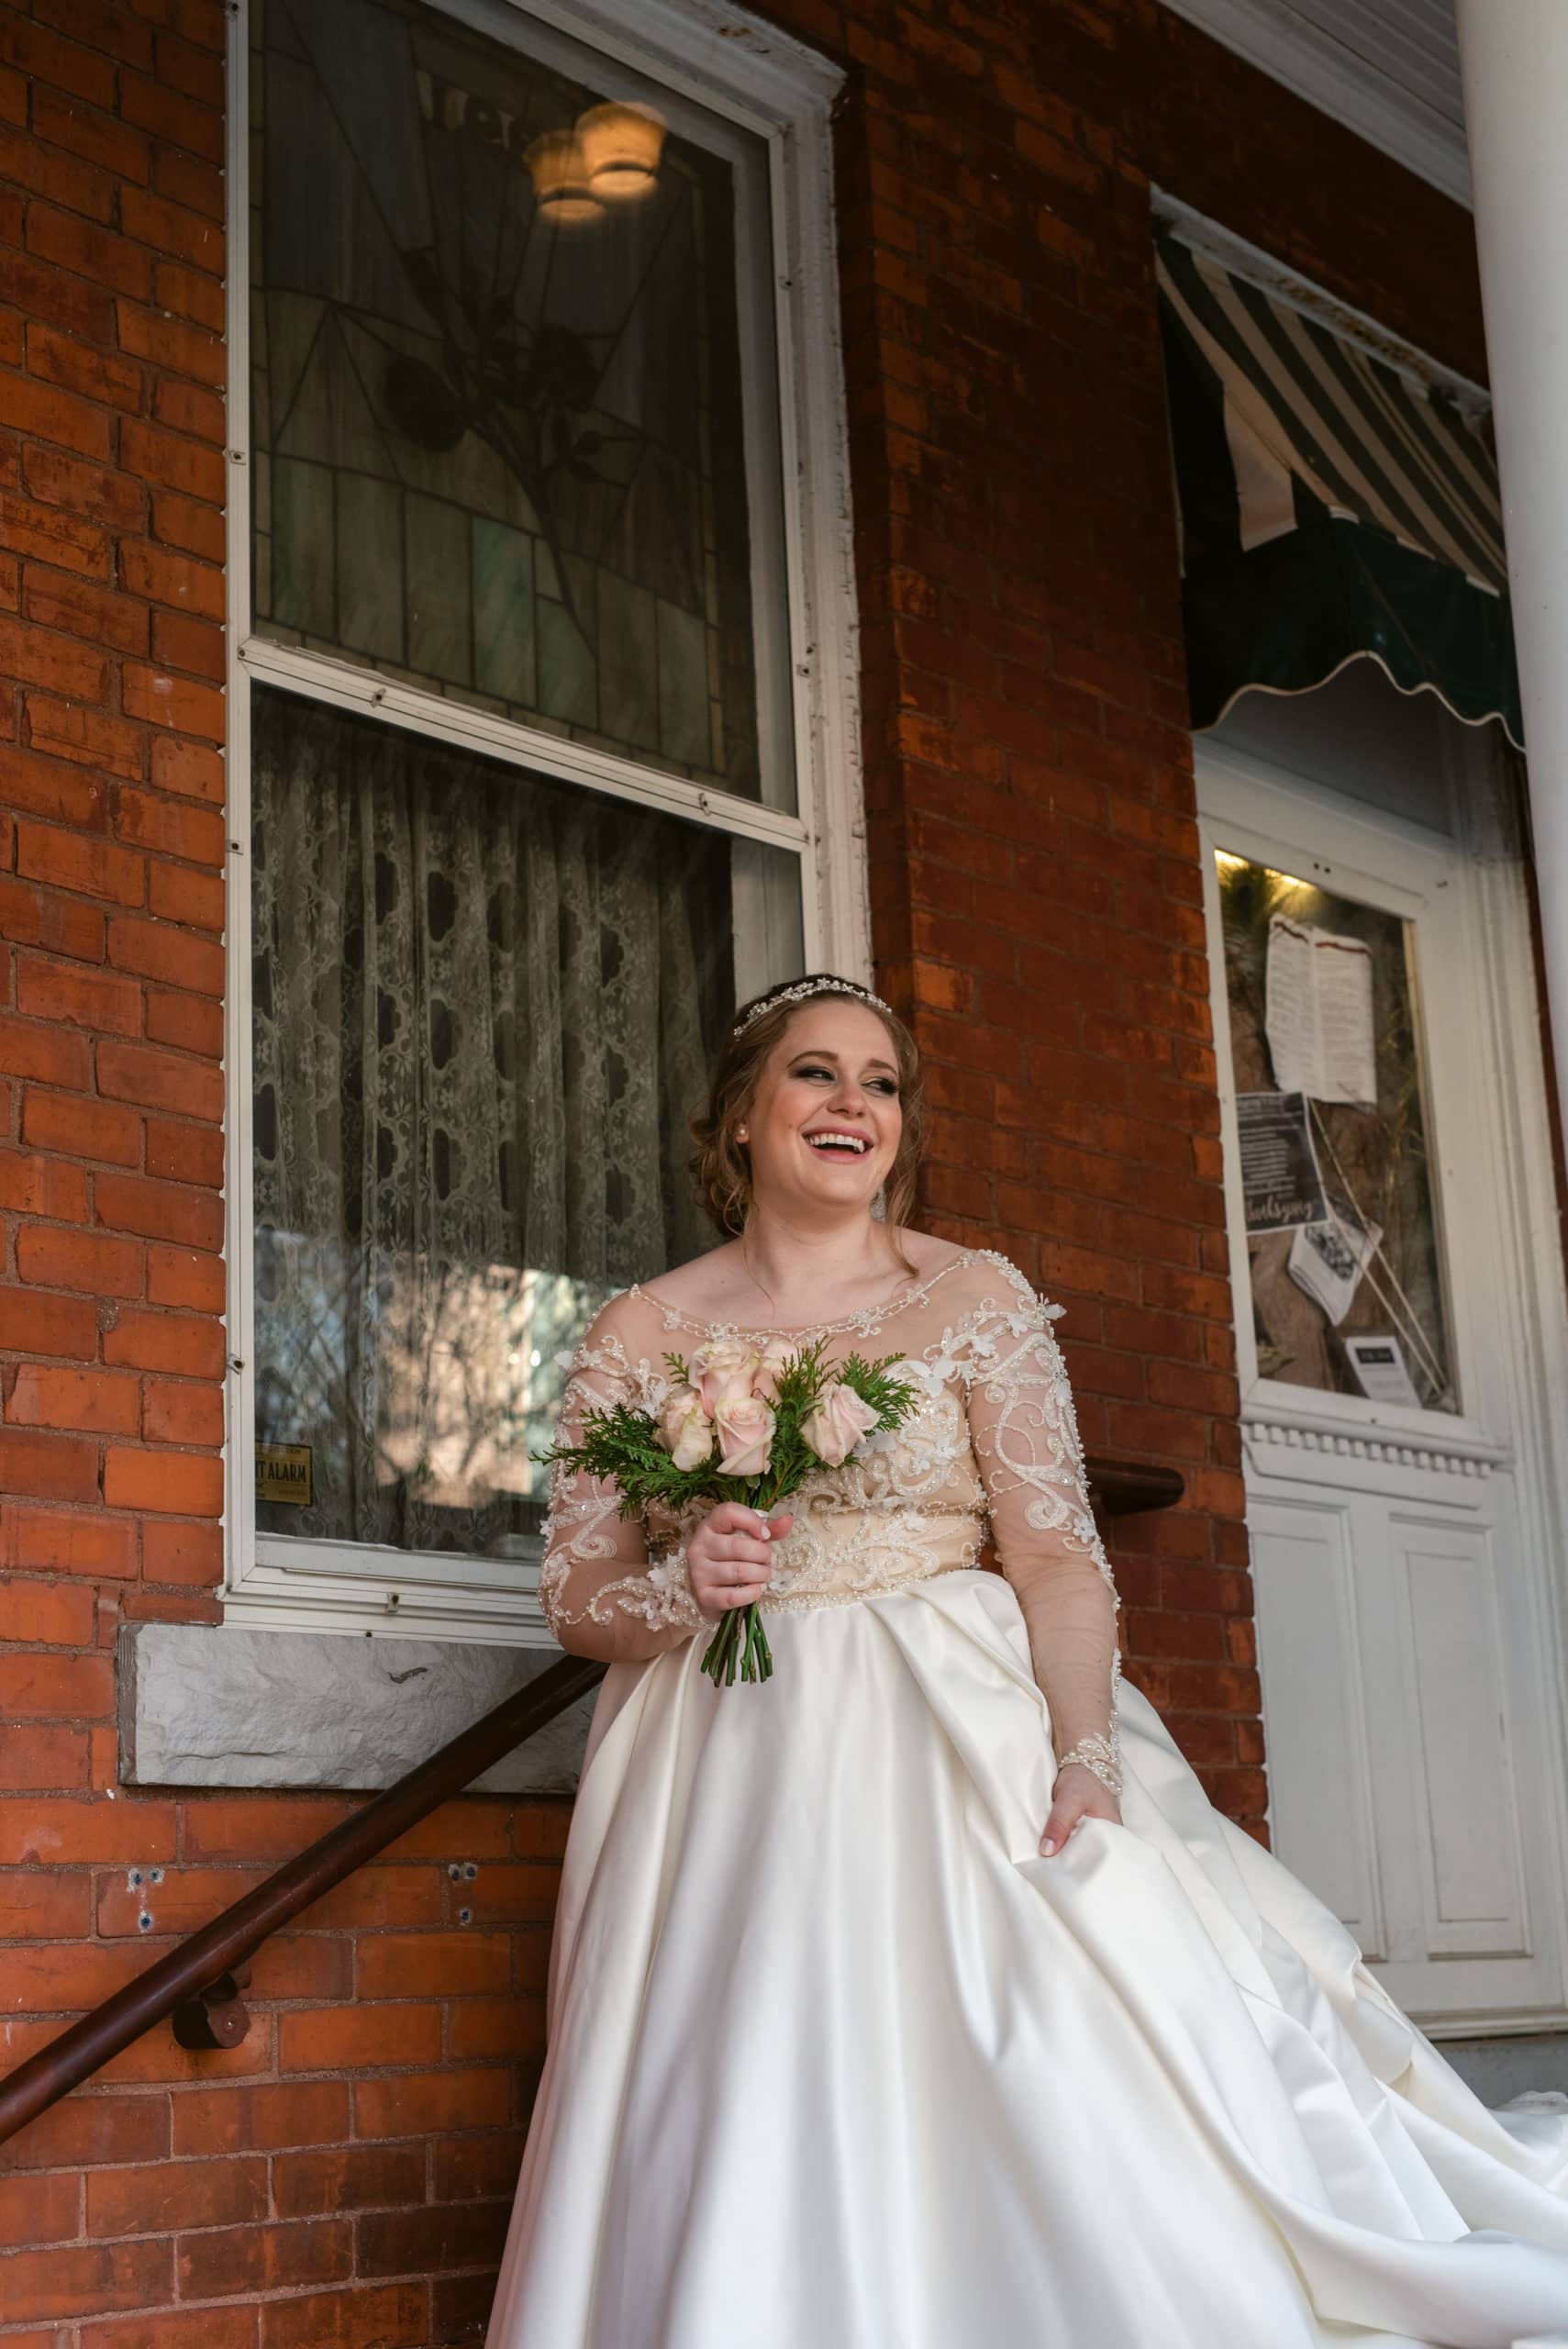 Bride walking down the stairs at the Historic Holly Hotel.